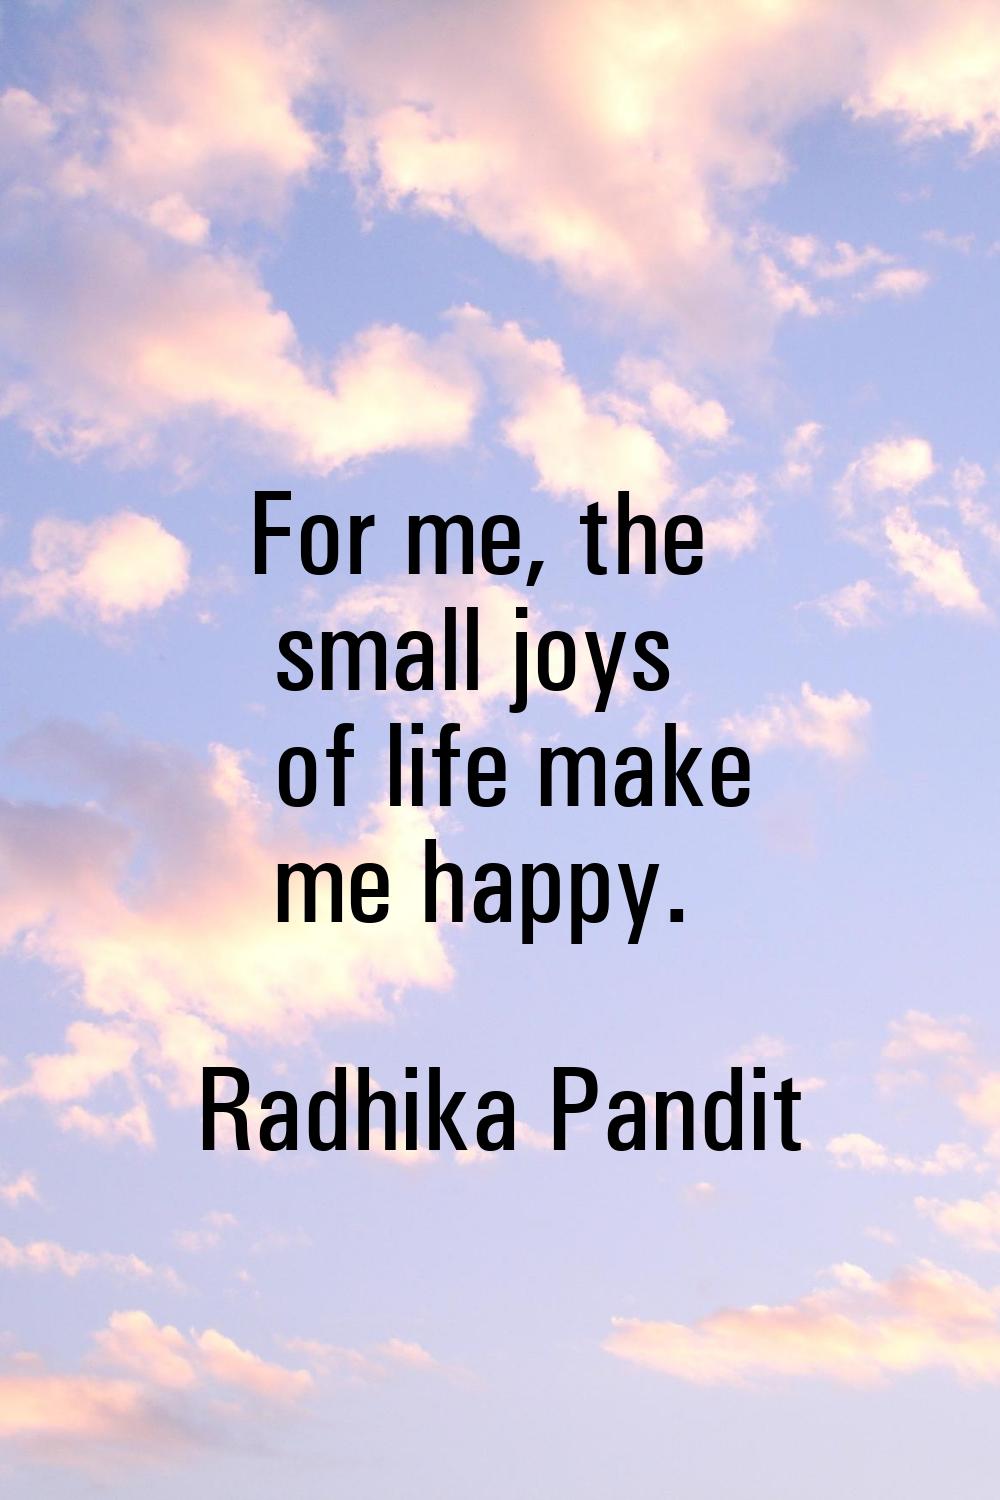 For me, the small joys of life make me happy.